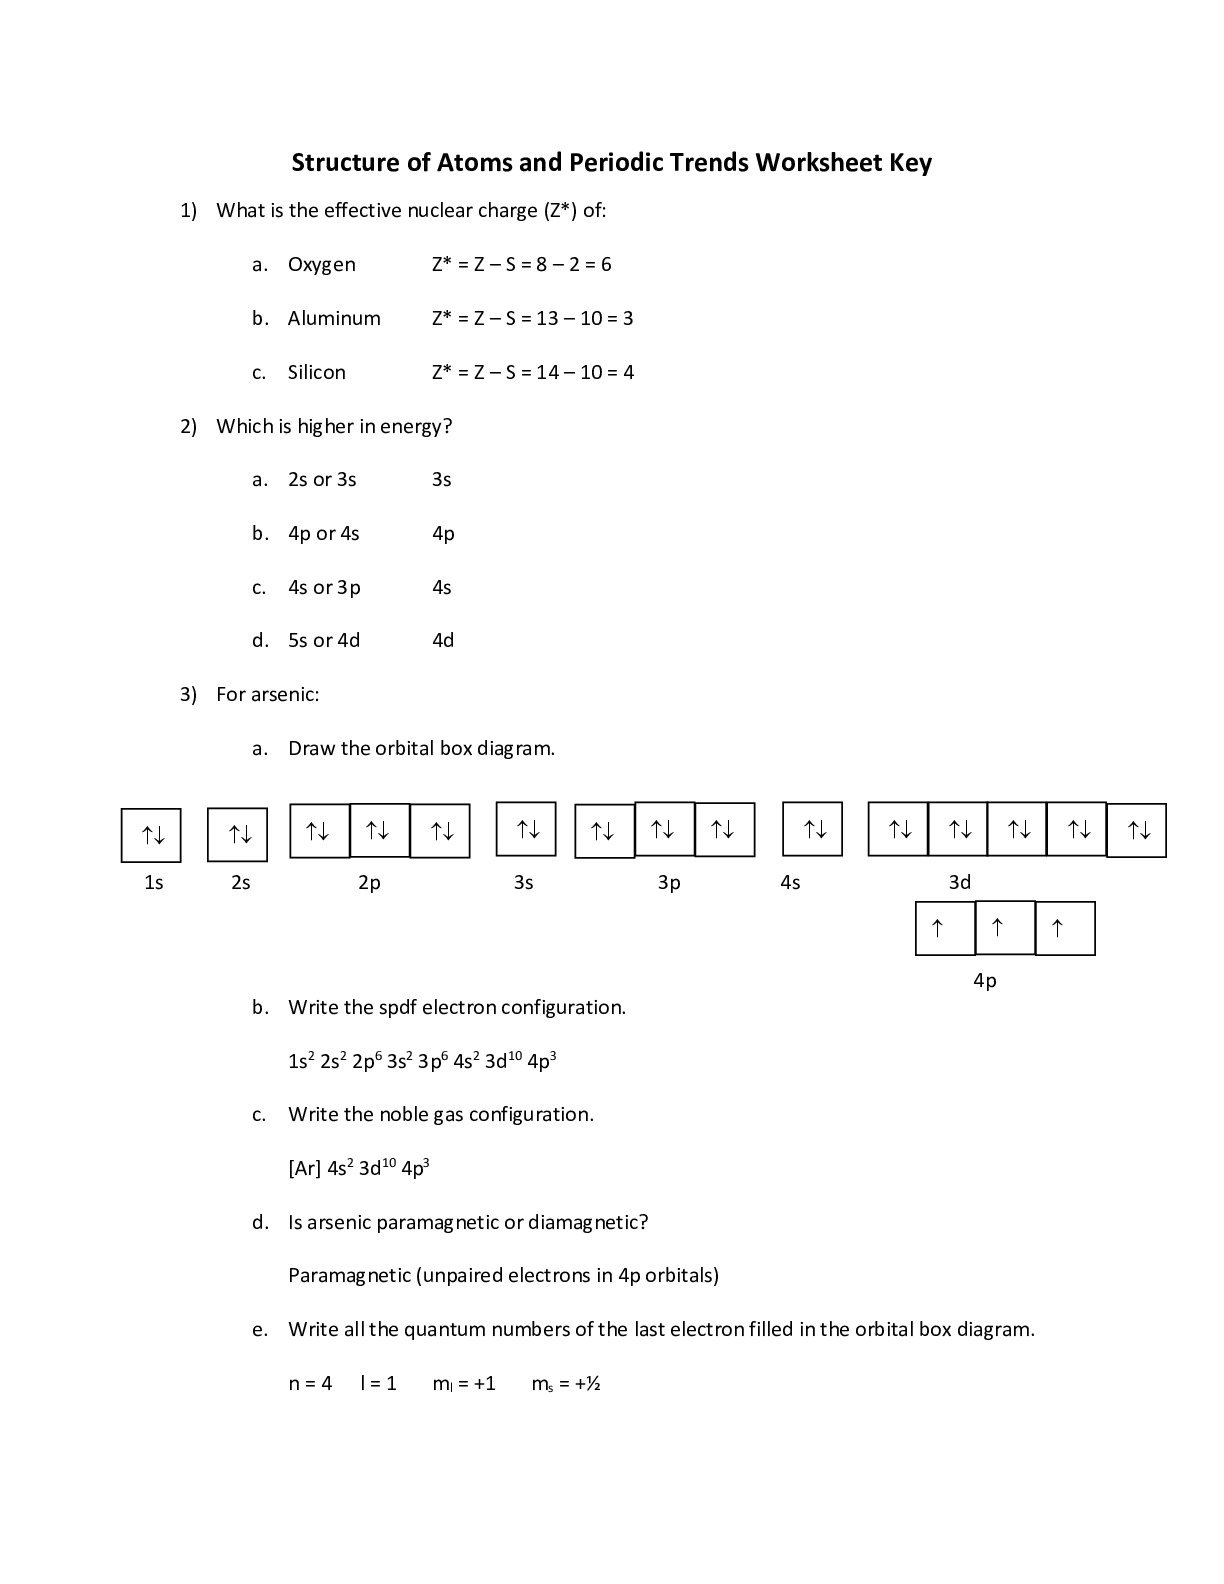 141_Structure_of_Atoms_Periodic_Trends_Worksheet_key__3_.pdf